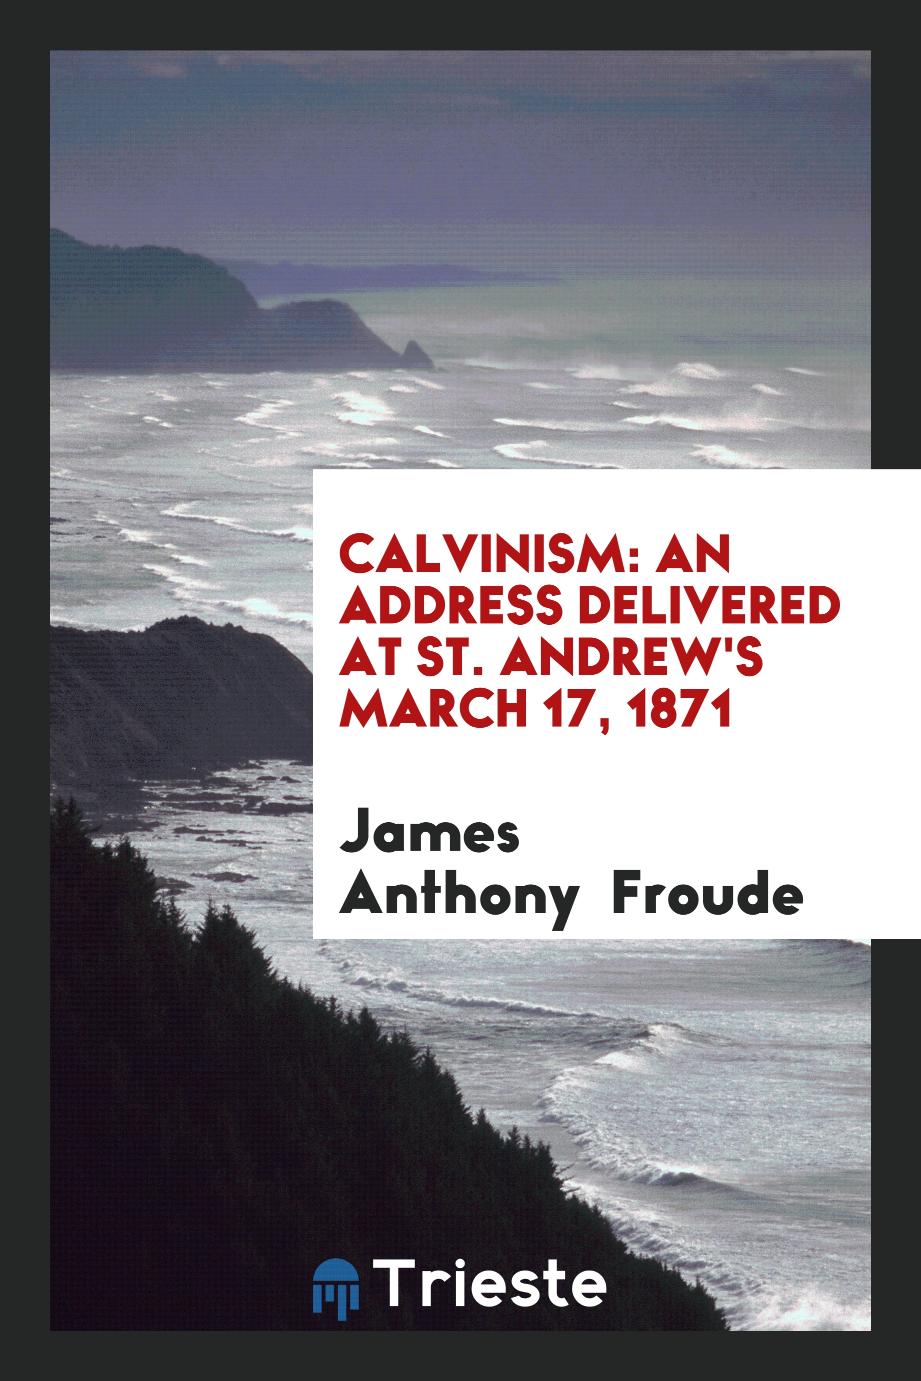 Calvinism: an address delivered at St. Andrew's March 17, 1871